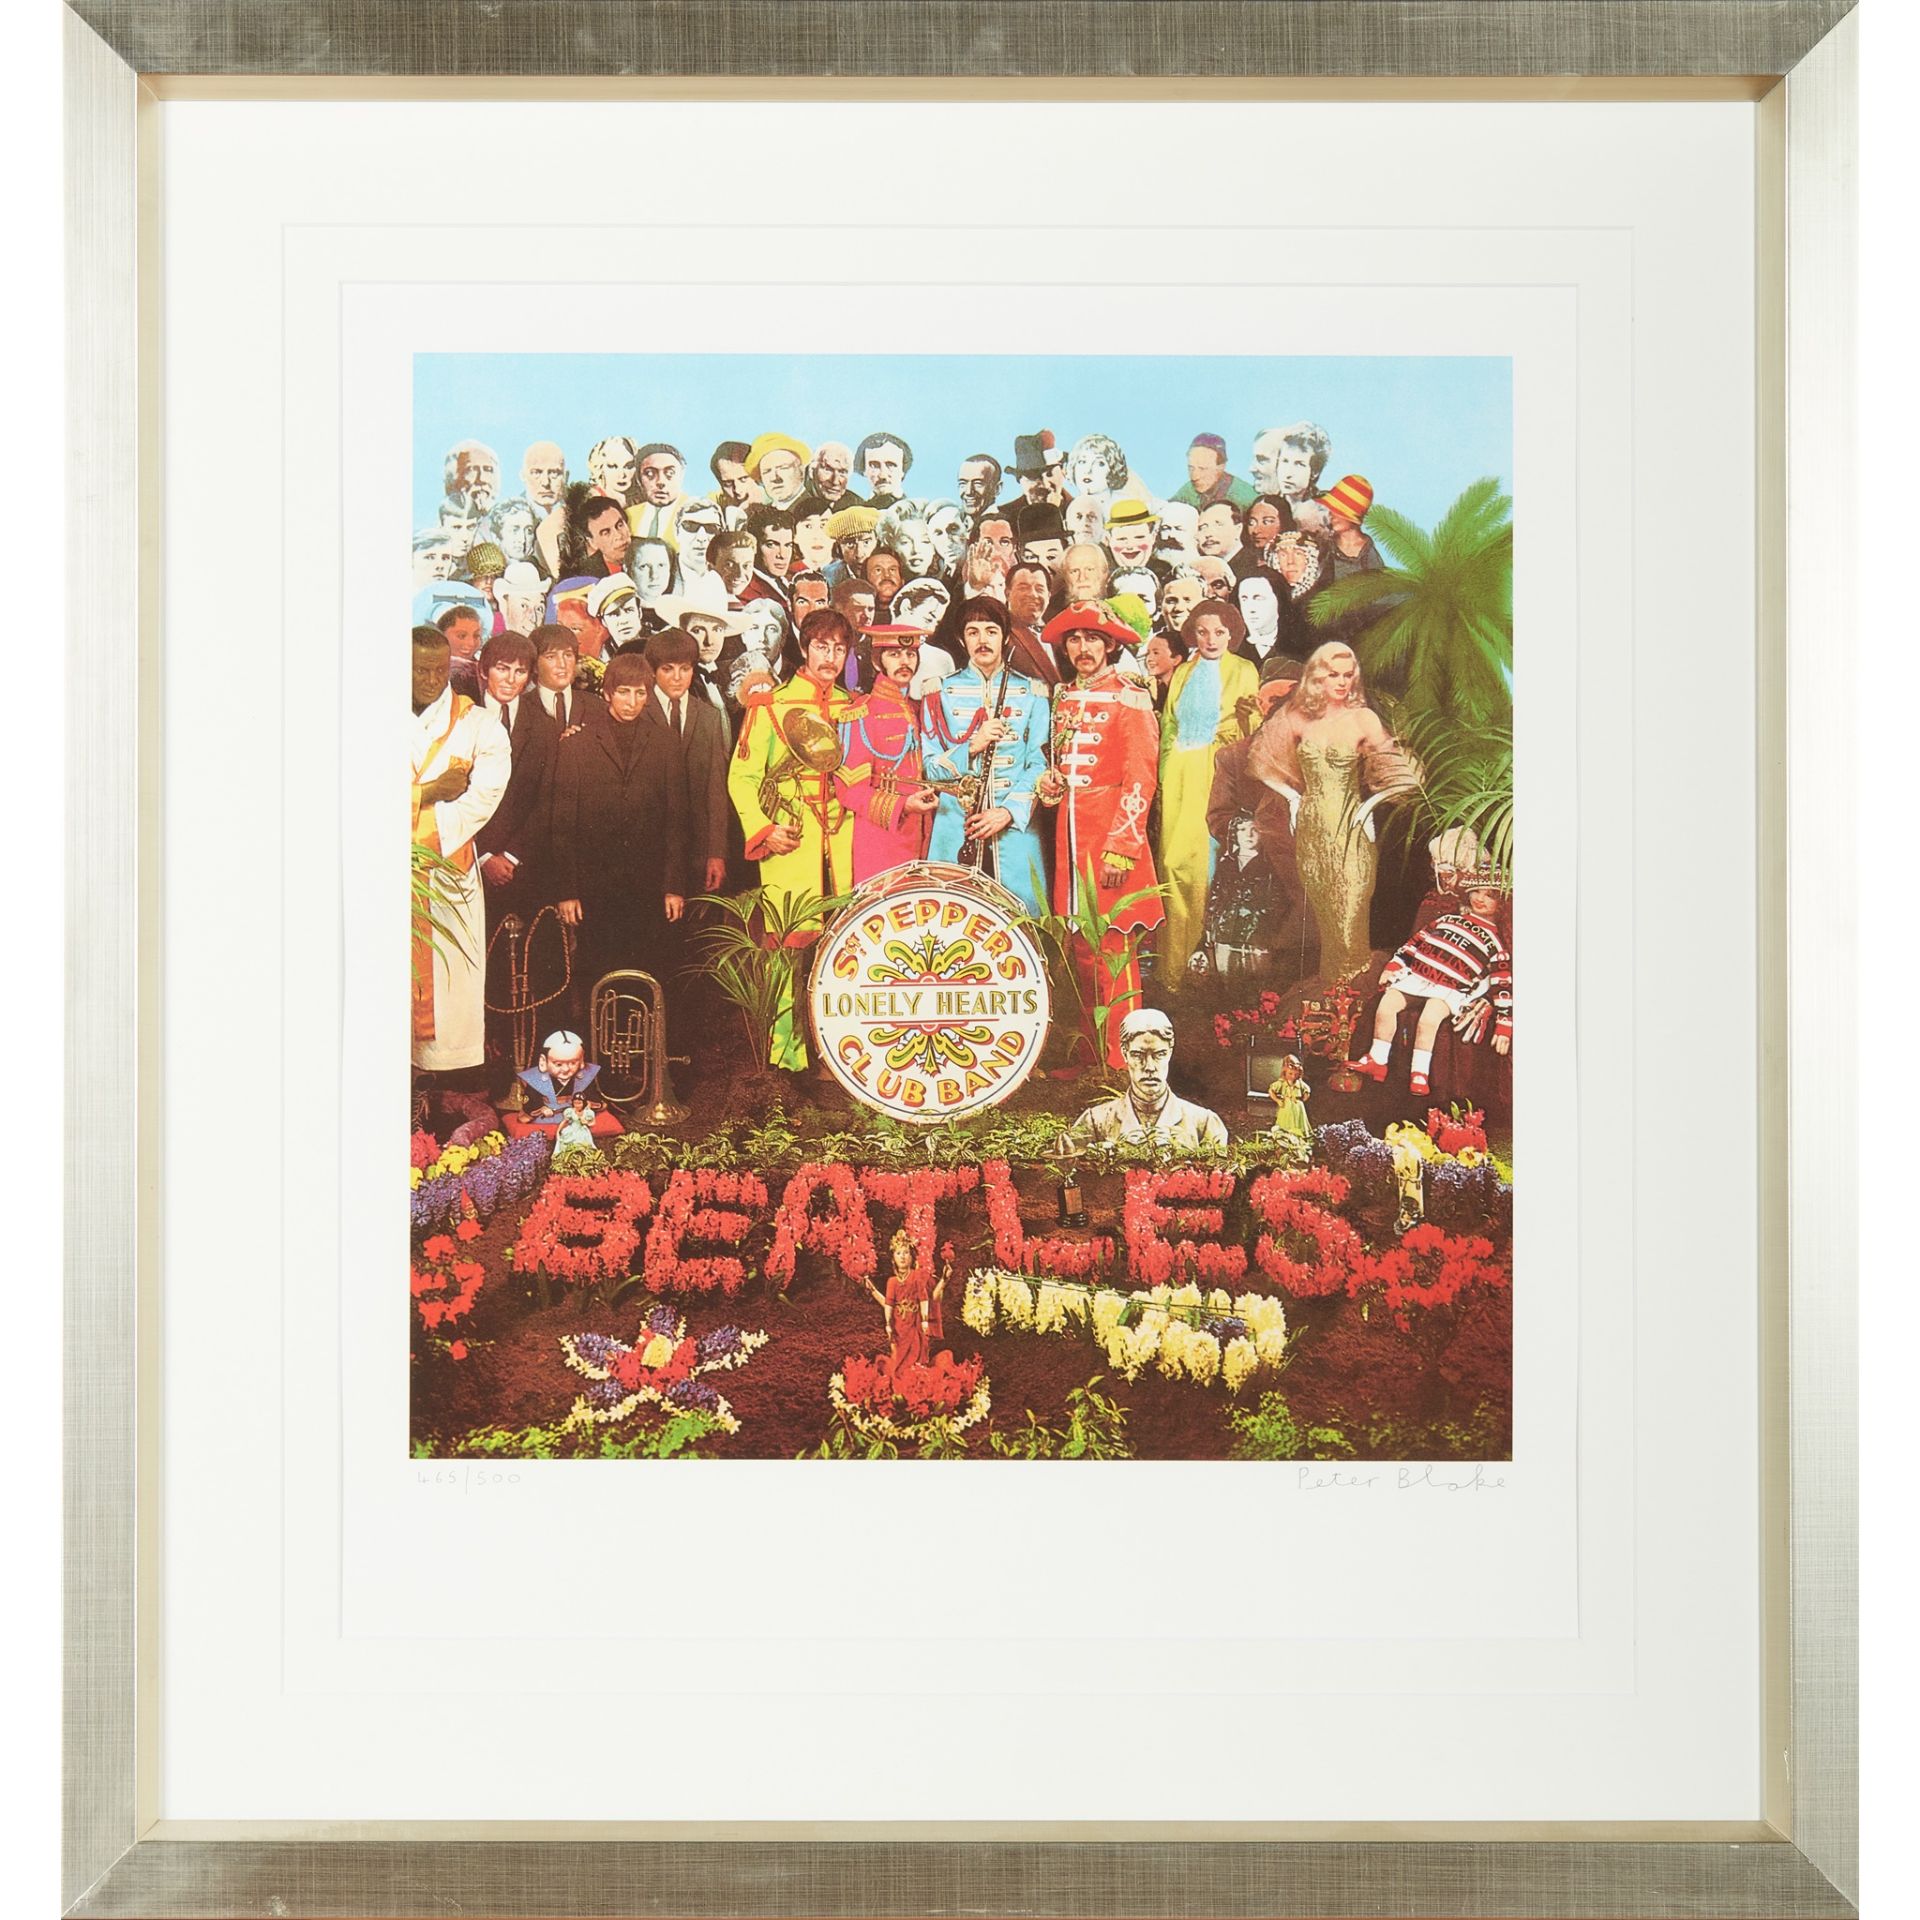 § SIR PETER BLAKE C.B.E., R.A. (BRITISH 1932-) SERGEANT PEPPER'S LONELY HEARTS CLUB BAND - 2007 - Image 2 of 3